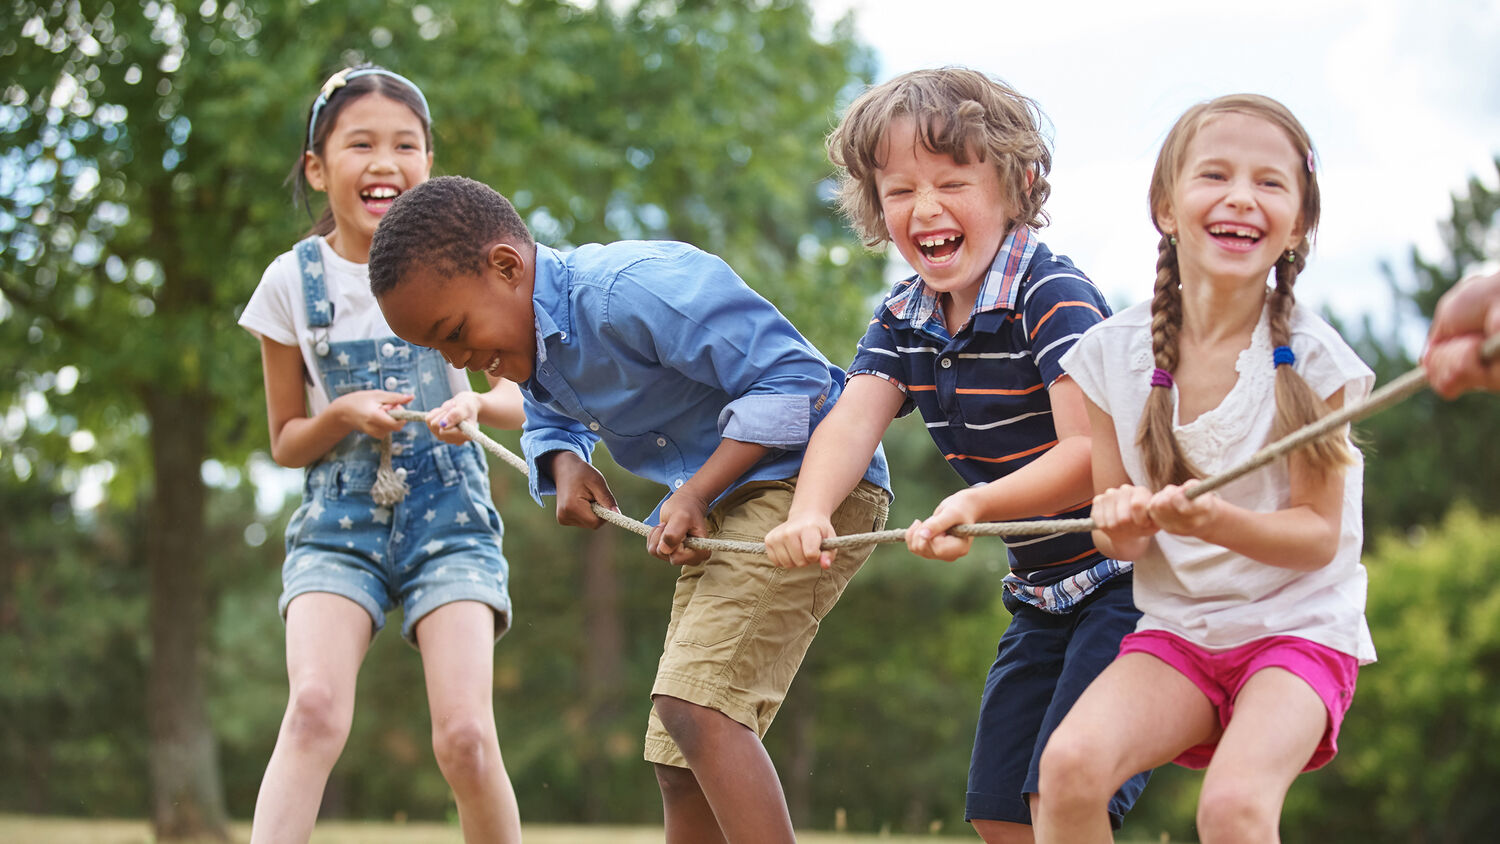 Four laughing children are pulling on a rope in a game of tug of war. All are wearing shorts and t-shirts.